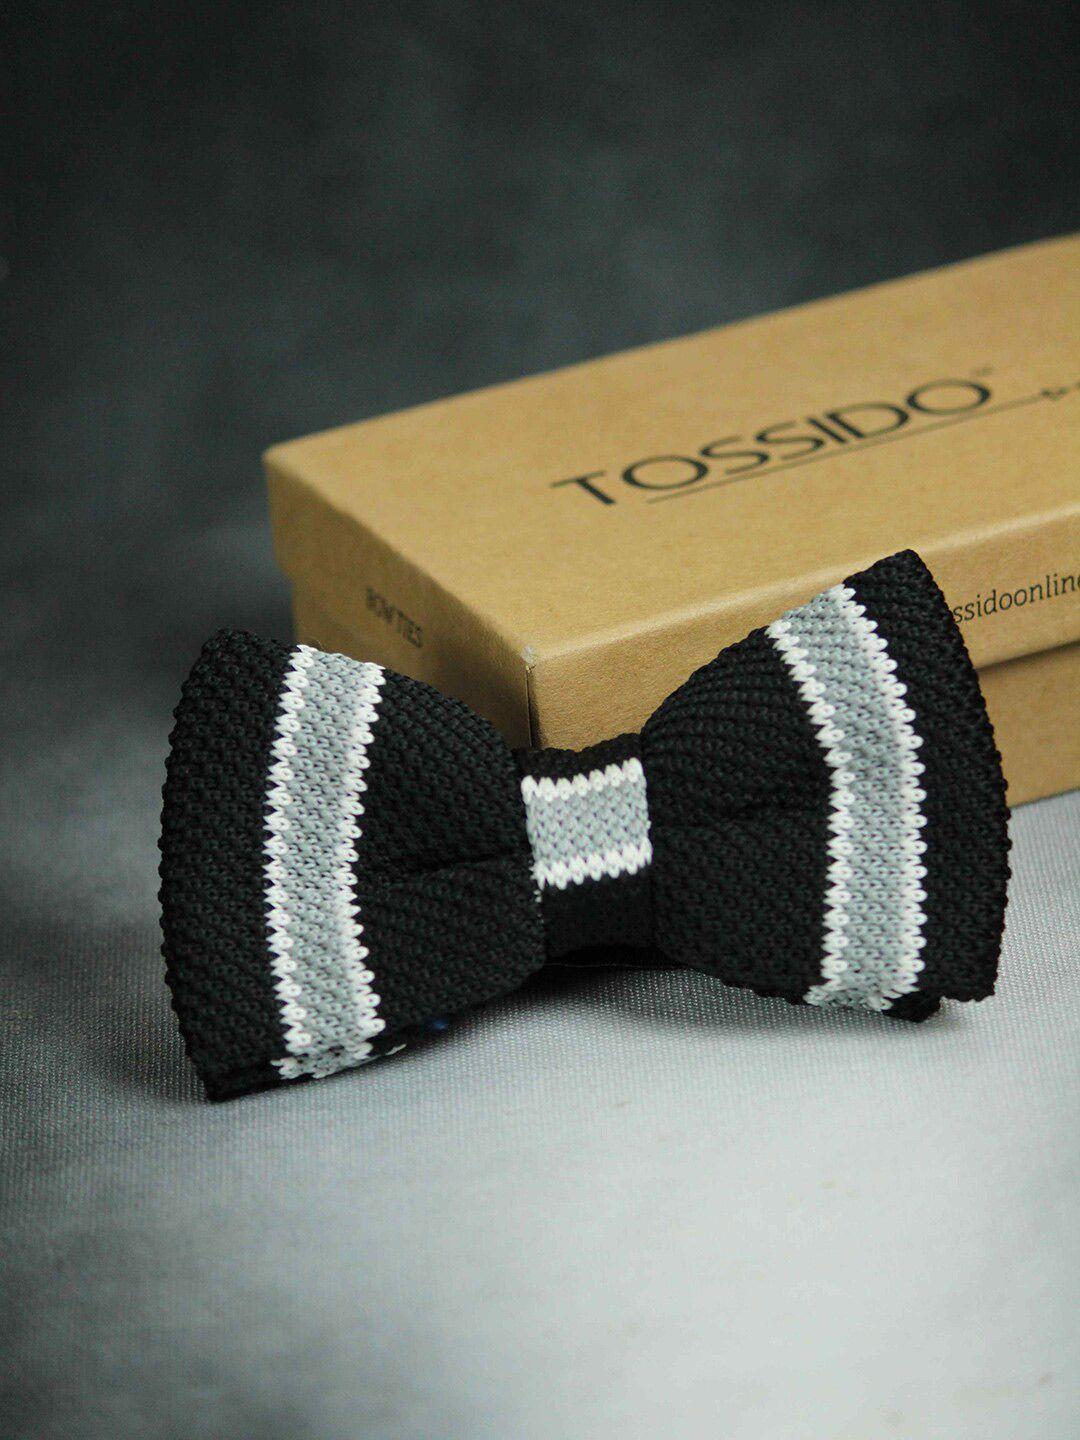 tossido men charcoal & white striped bow tie